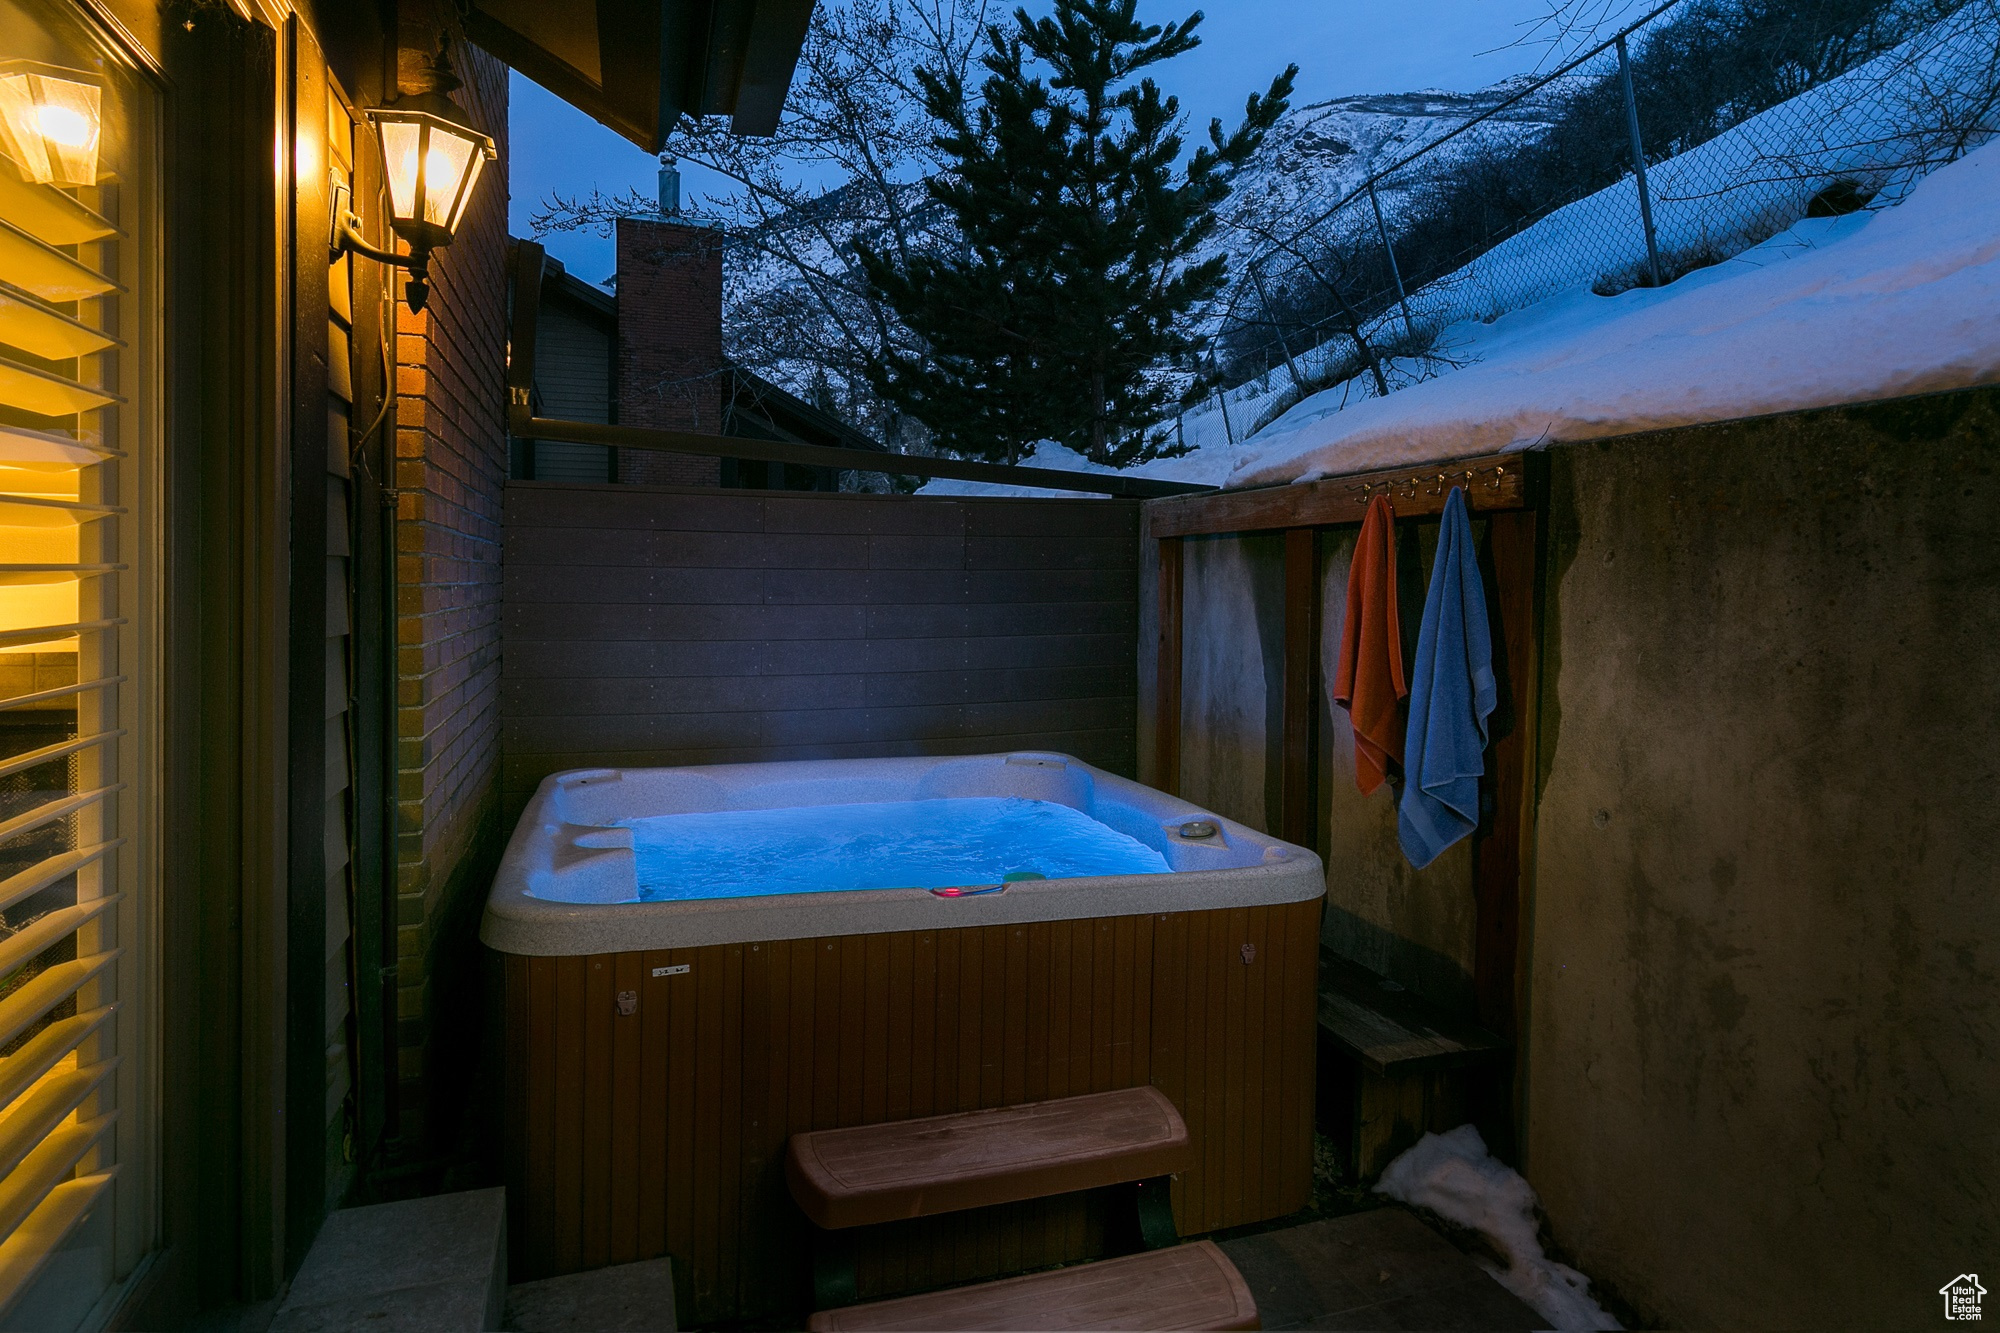 Snow covered patio featuring a hot tub (hot tub can be running and serviced for an additional $200/month).